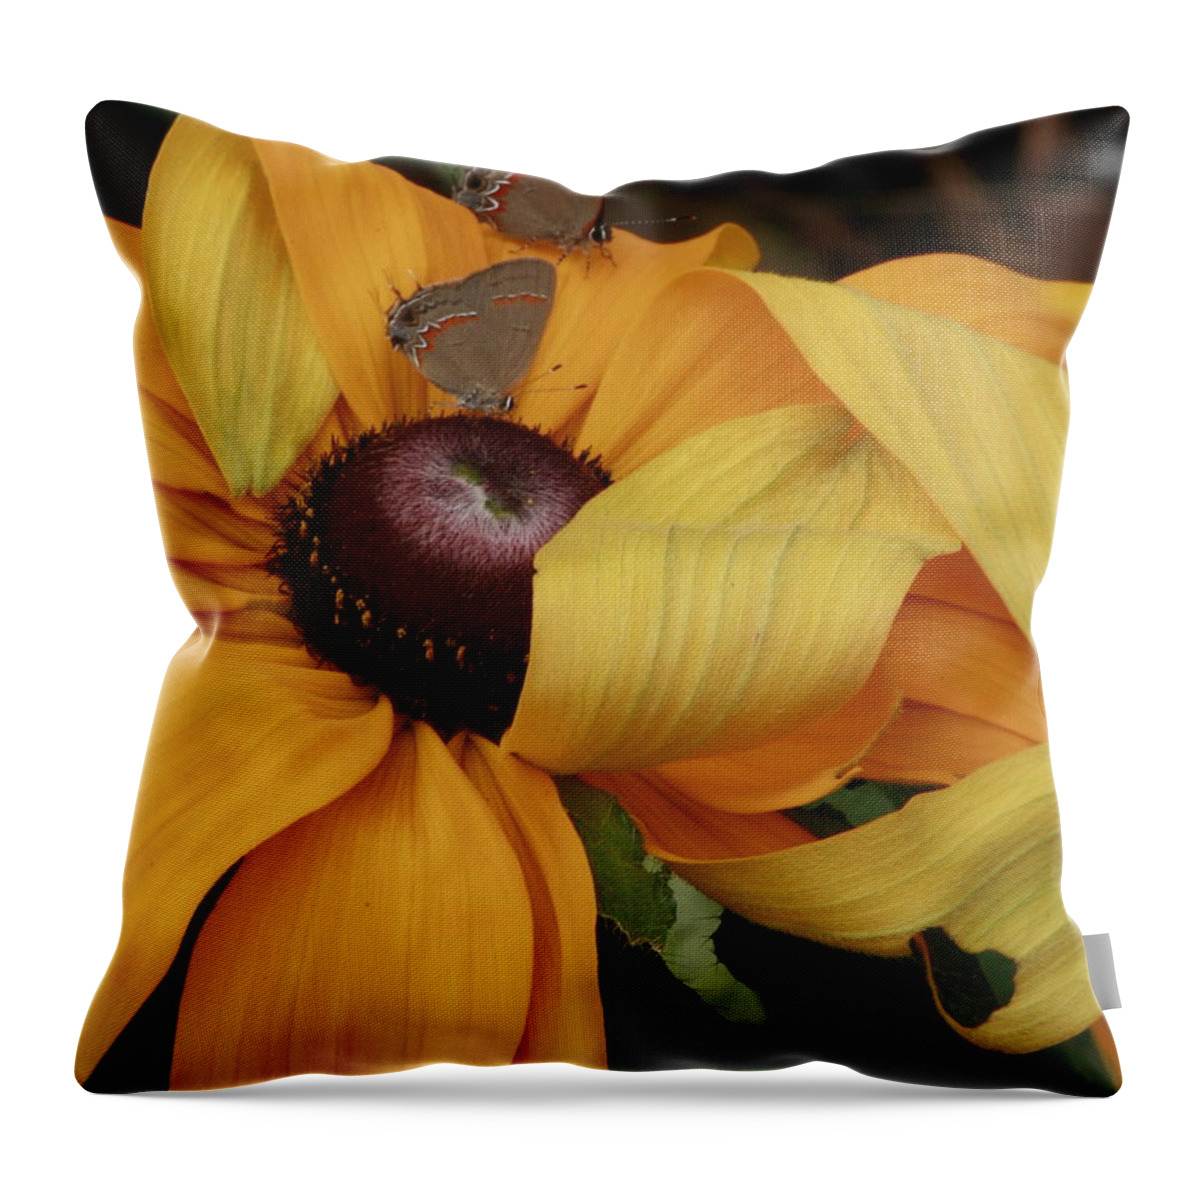 Butterflies Throw Pillow featuring the photograph Last Chance For Romance by Jean Cormier